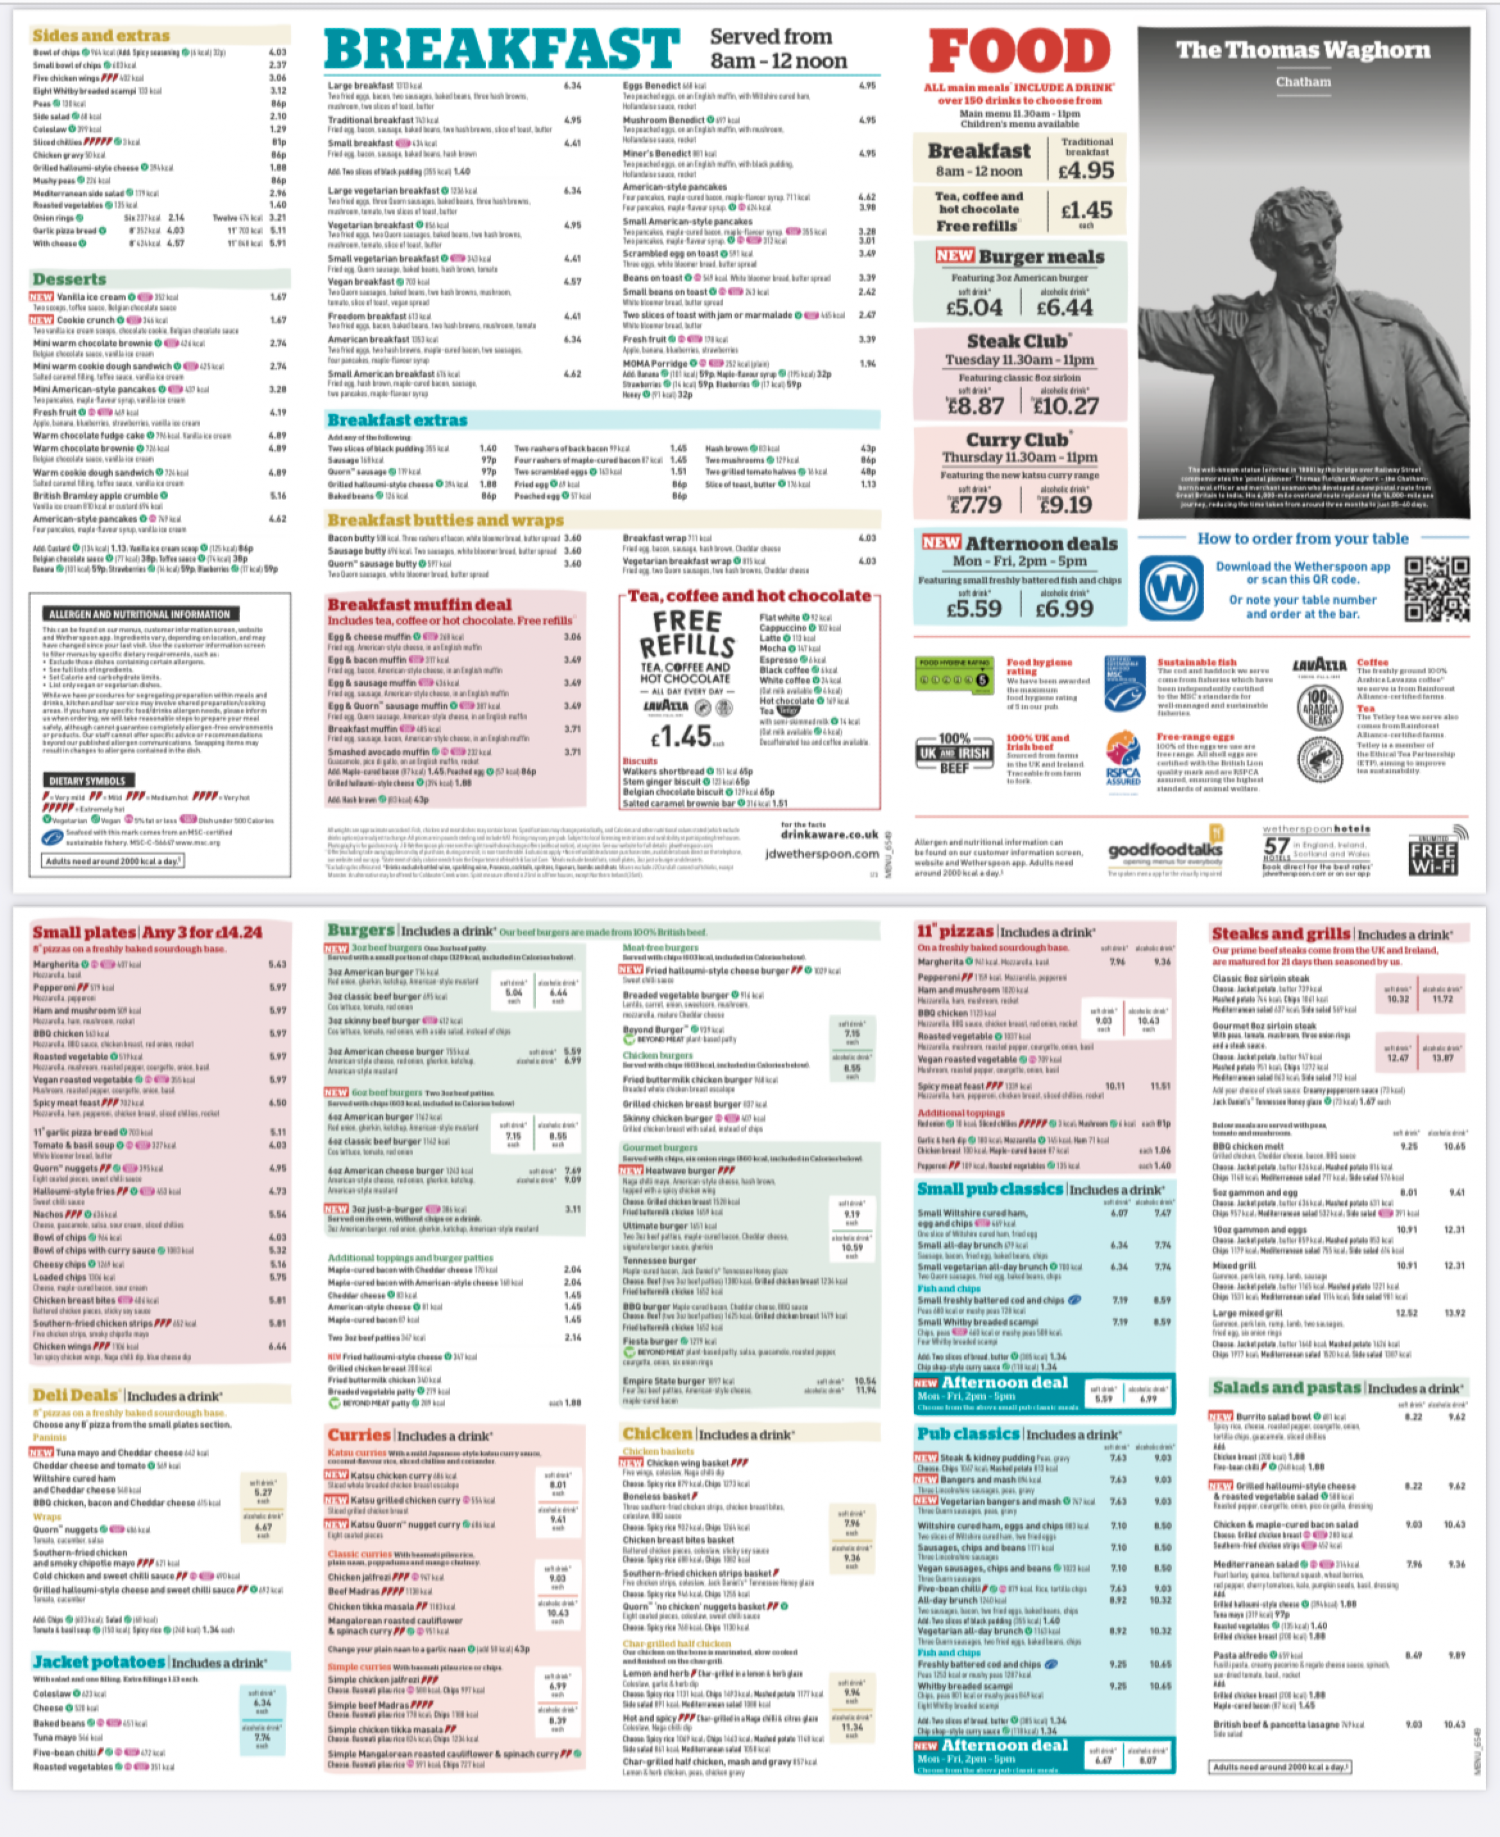 Takeaway Restaurant Menu Page - Wetherspoons – The Thomas Waghorn - Chatham